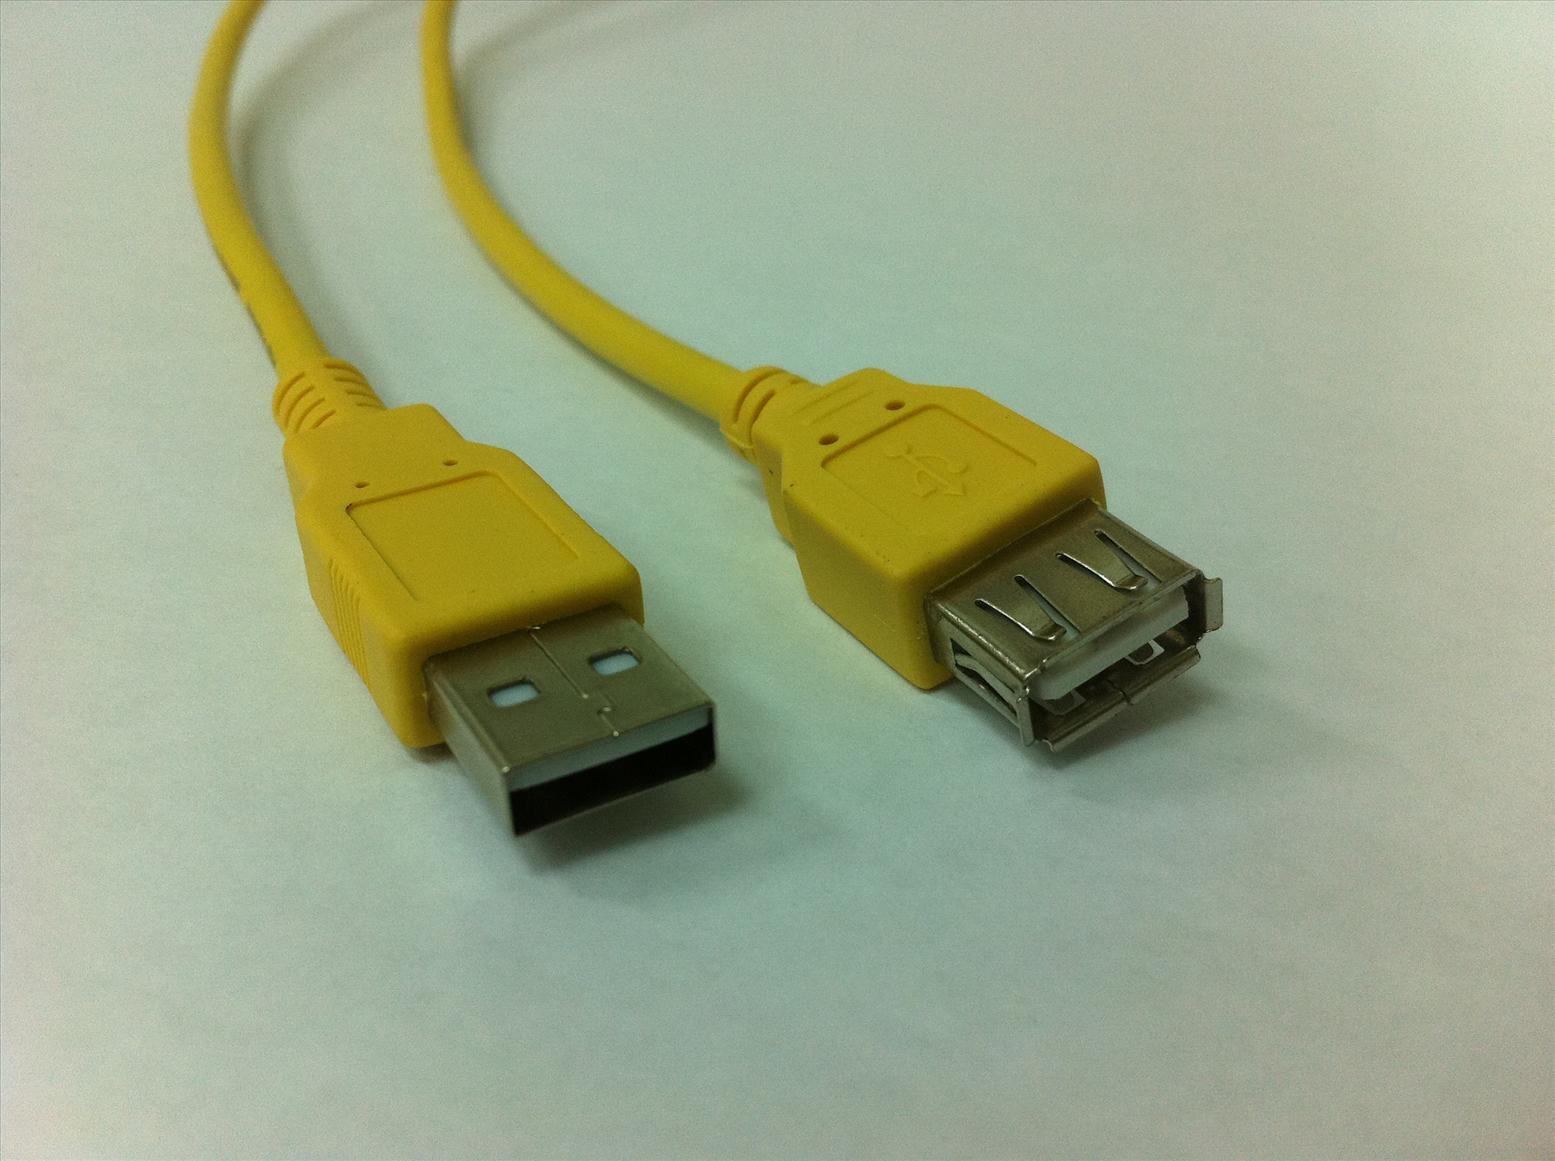 SIEMAX 1.5 Meter USB 2.0 High Speed Extension Cable